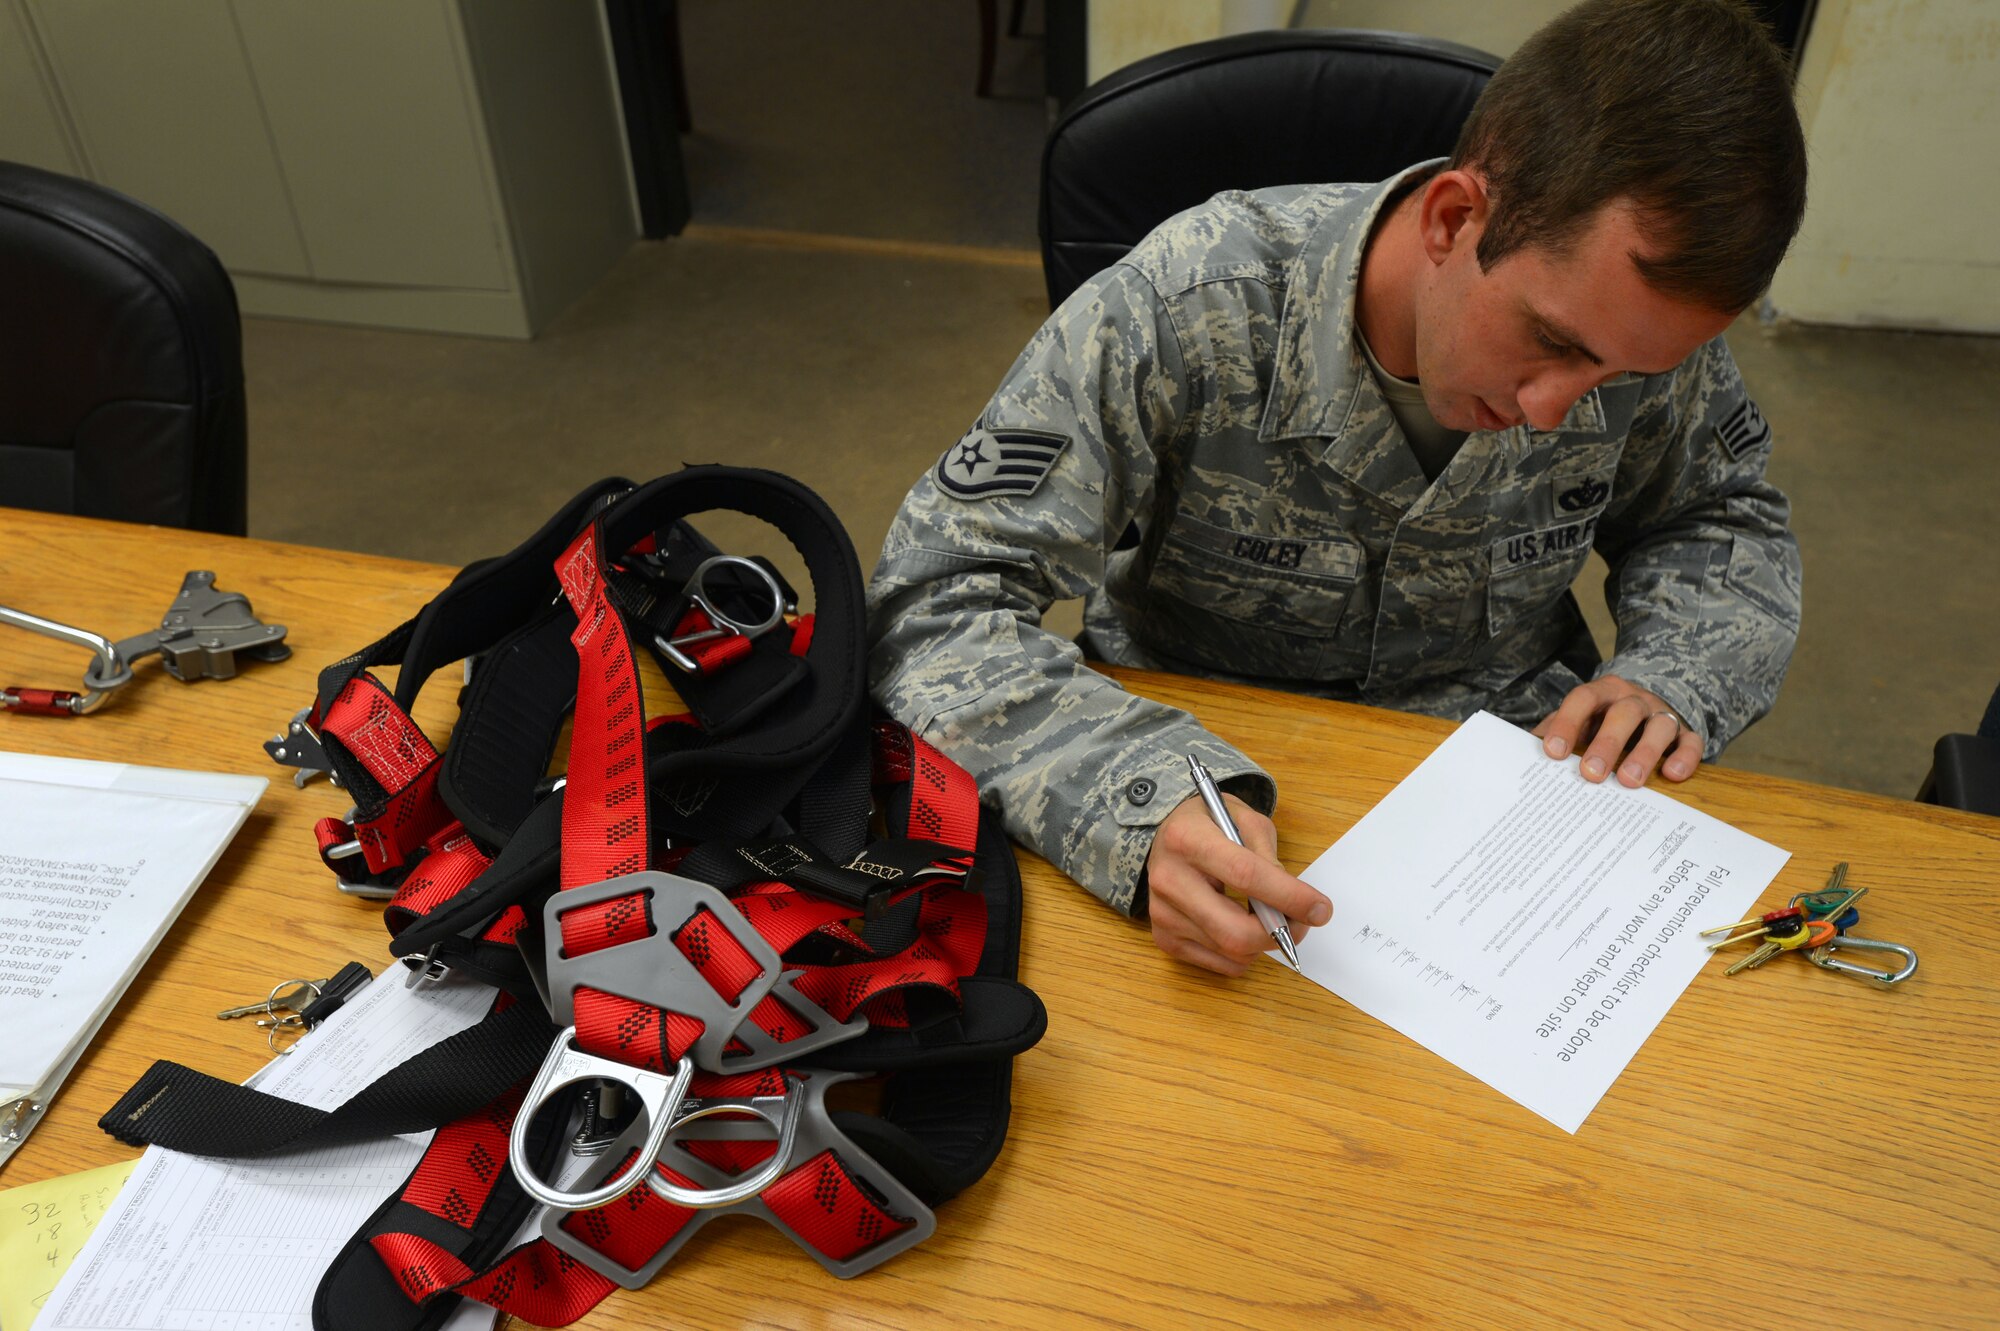 U.S. Air Force Staff Sgt. Phillip Coley, 20th Civil Engineer Squadron water and fuels systems maintenance craftsman, completes a pre-climb safety checklist at Shaw Air Force Base, S.C., July 8, 2014. Coley, along with all WFSM airmen, completes yearly fall protection training to ensure safety while climbing and inspecting water towers. (U.S. Air Force photo by Airman 1st Class Jensen Stidham/Released)